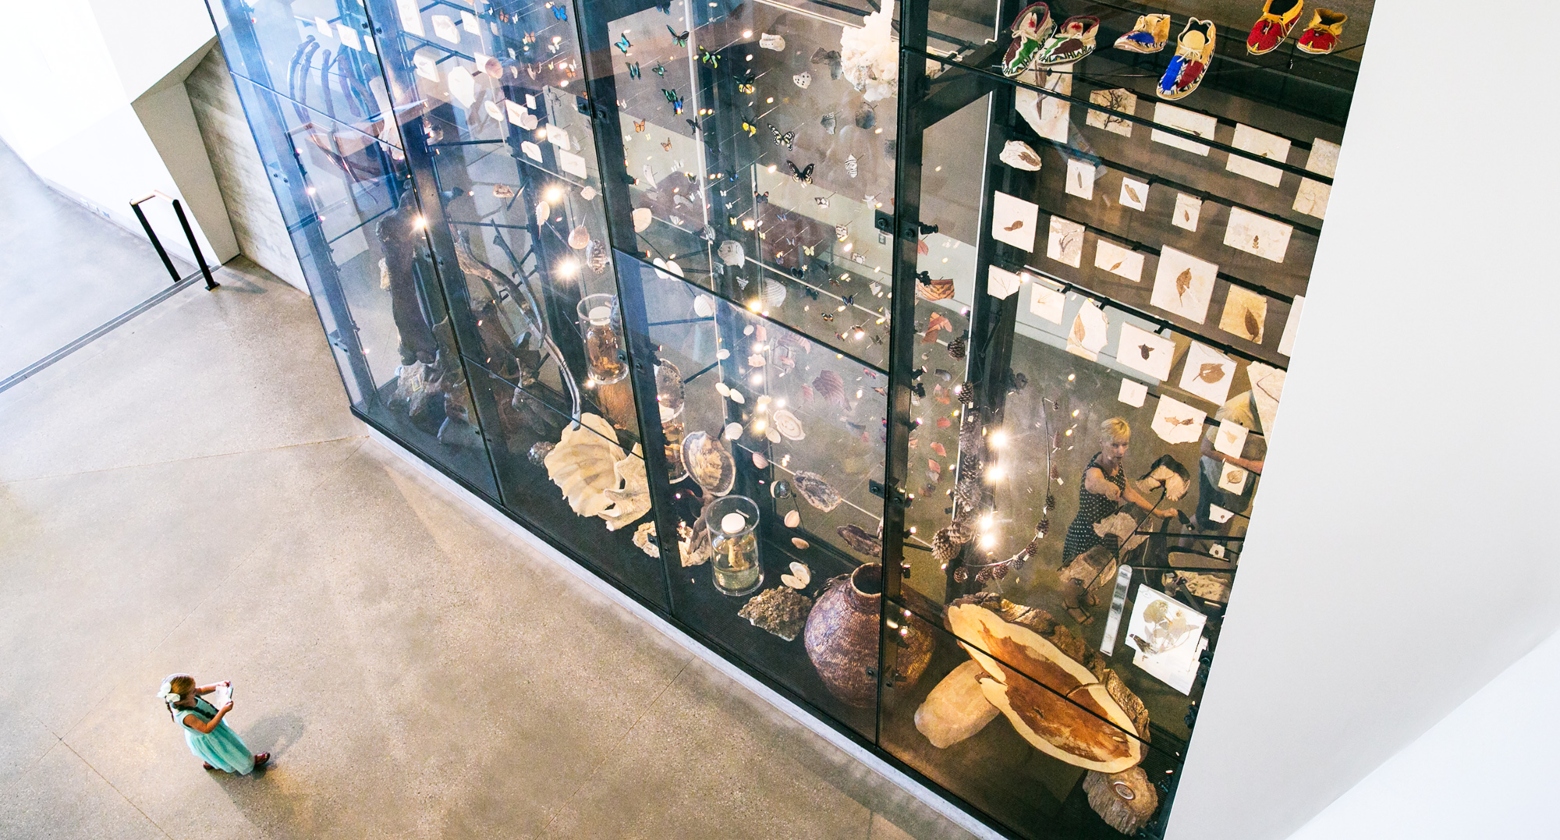 [image] The Museum's Wall of Wonders